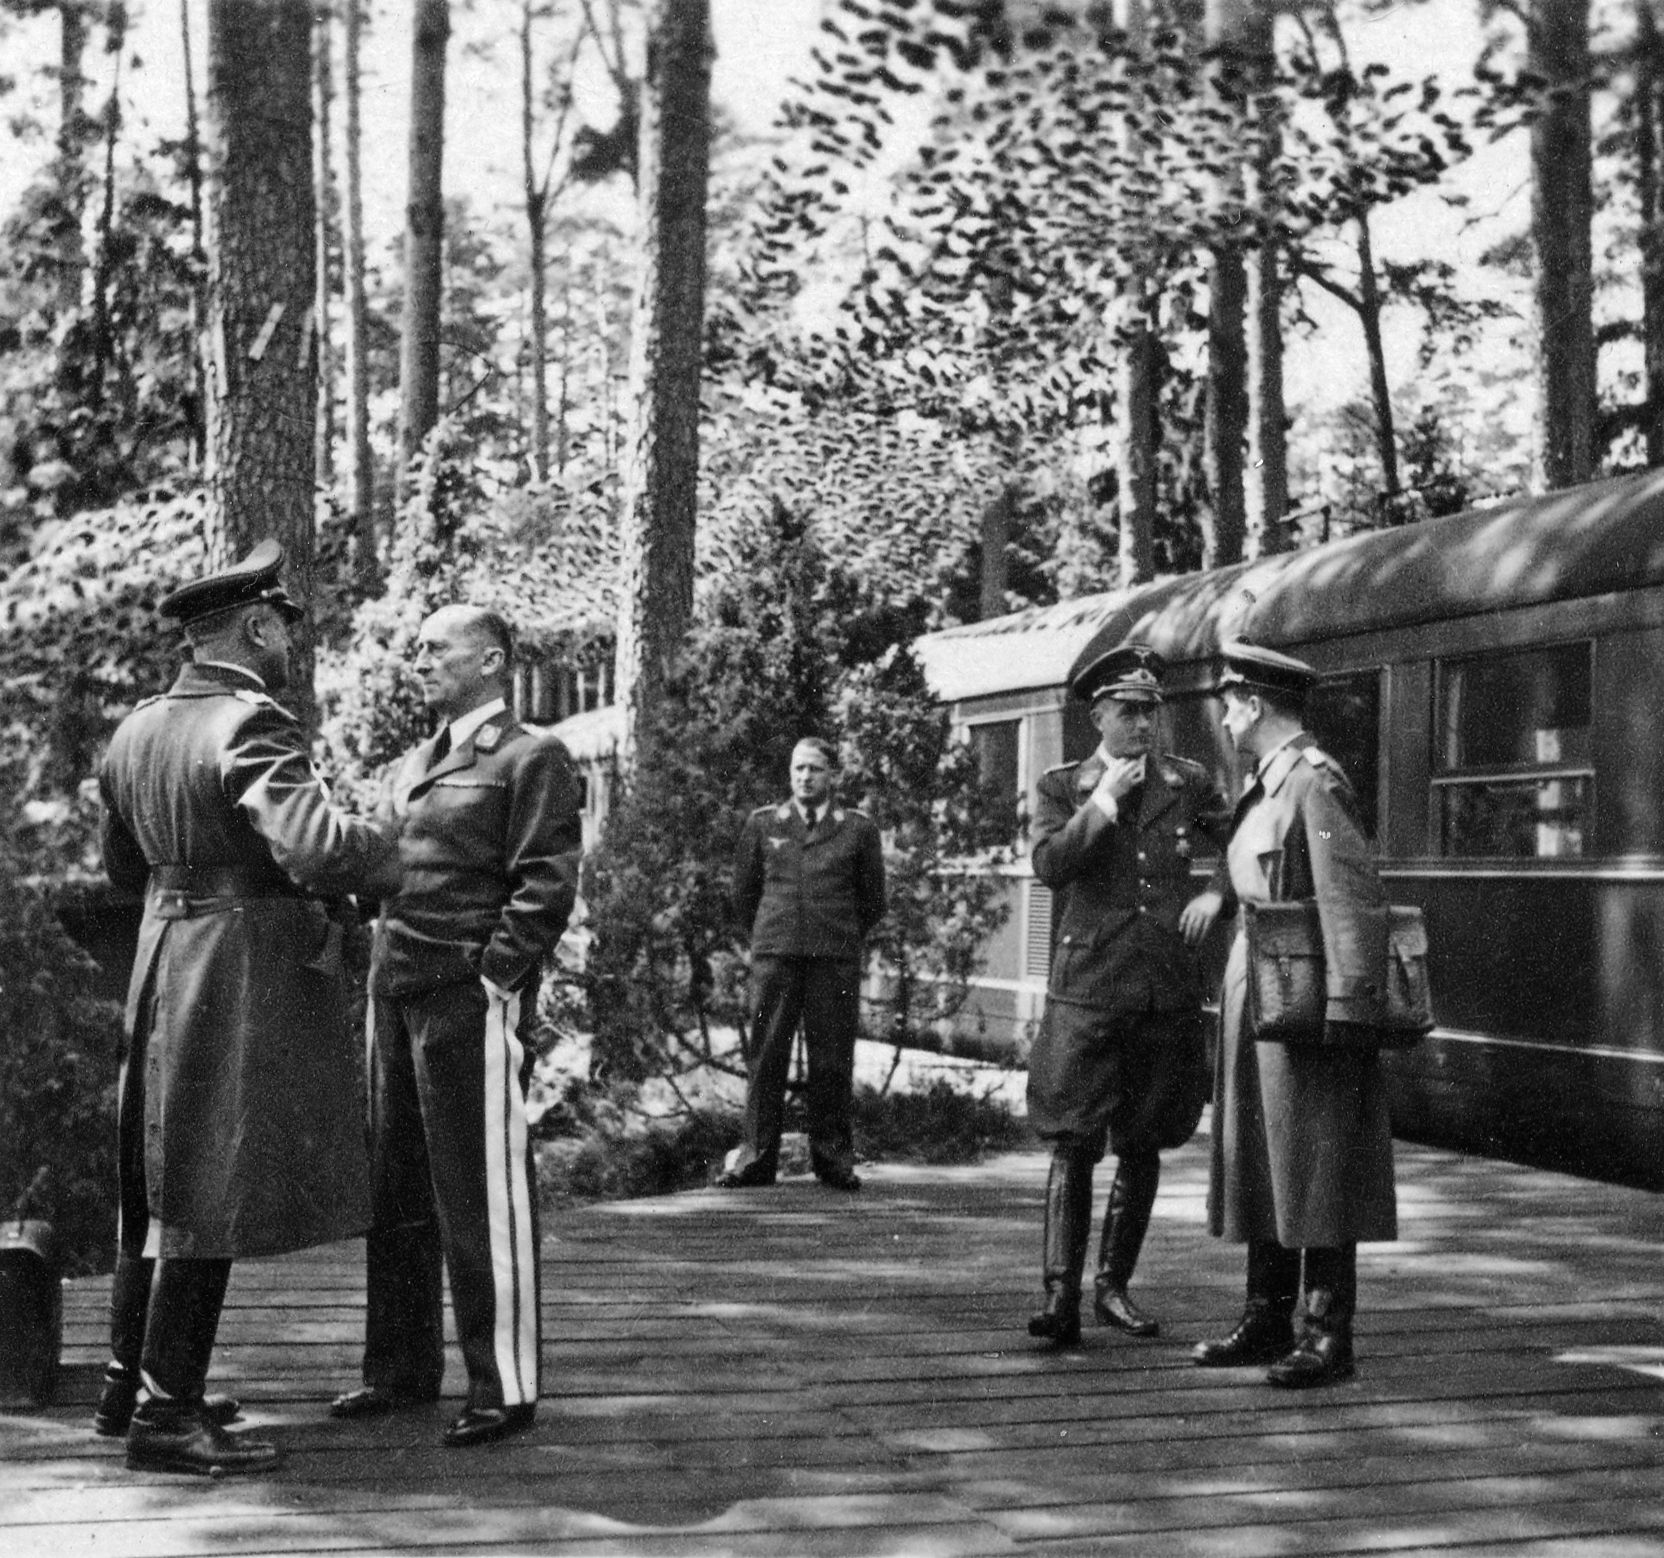 Couriers meet beside the train that served as Göring’s mobile command headquarters.